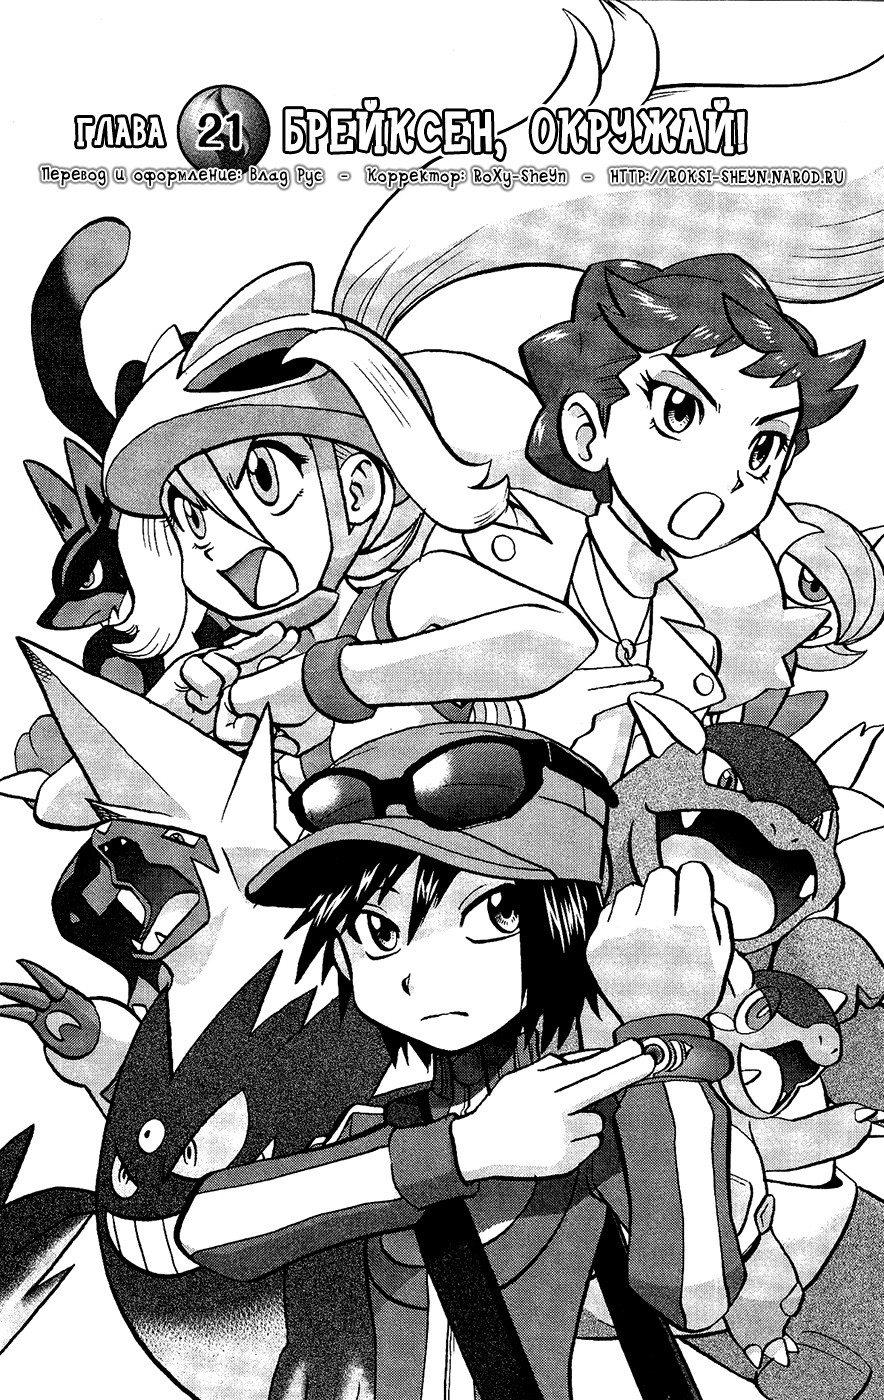 Pocket Monsters Special XY 3 - 21 Брейксен, окружай!